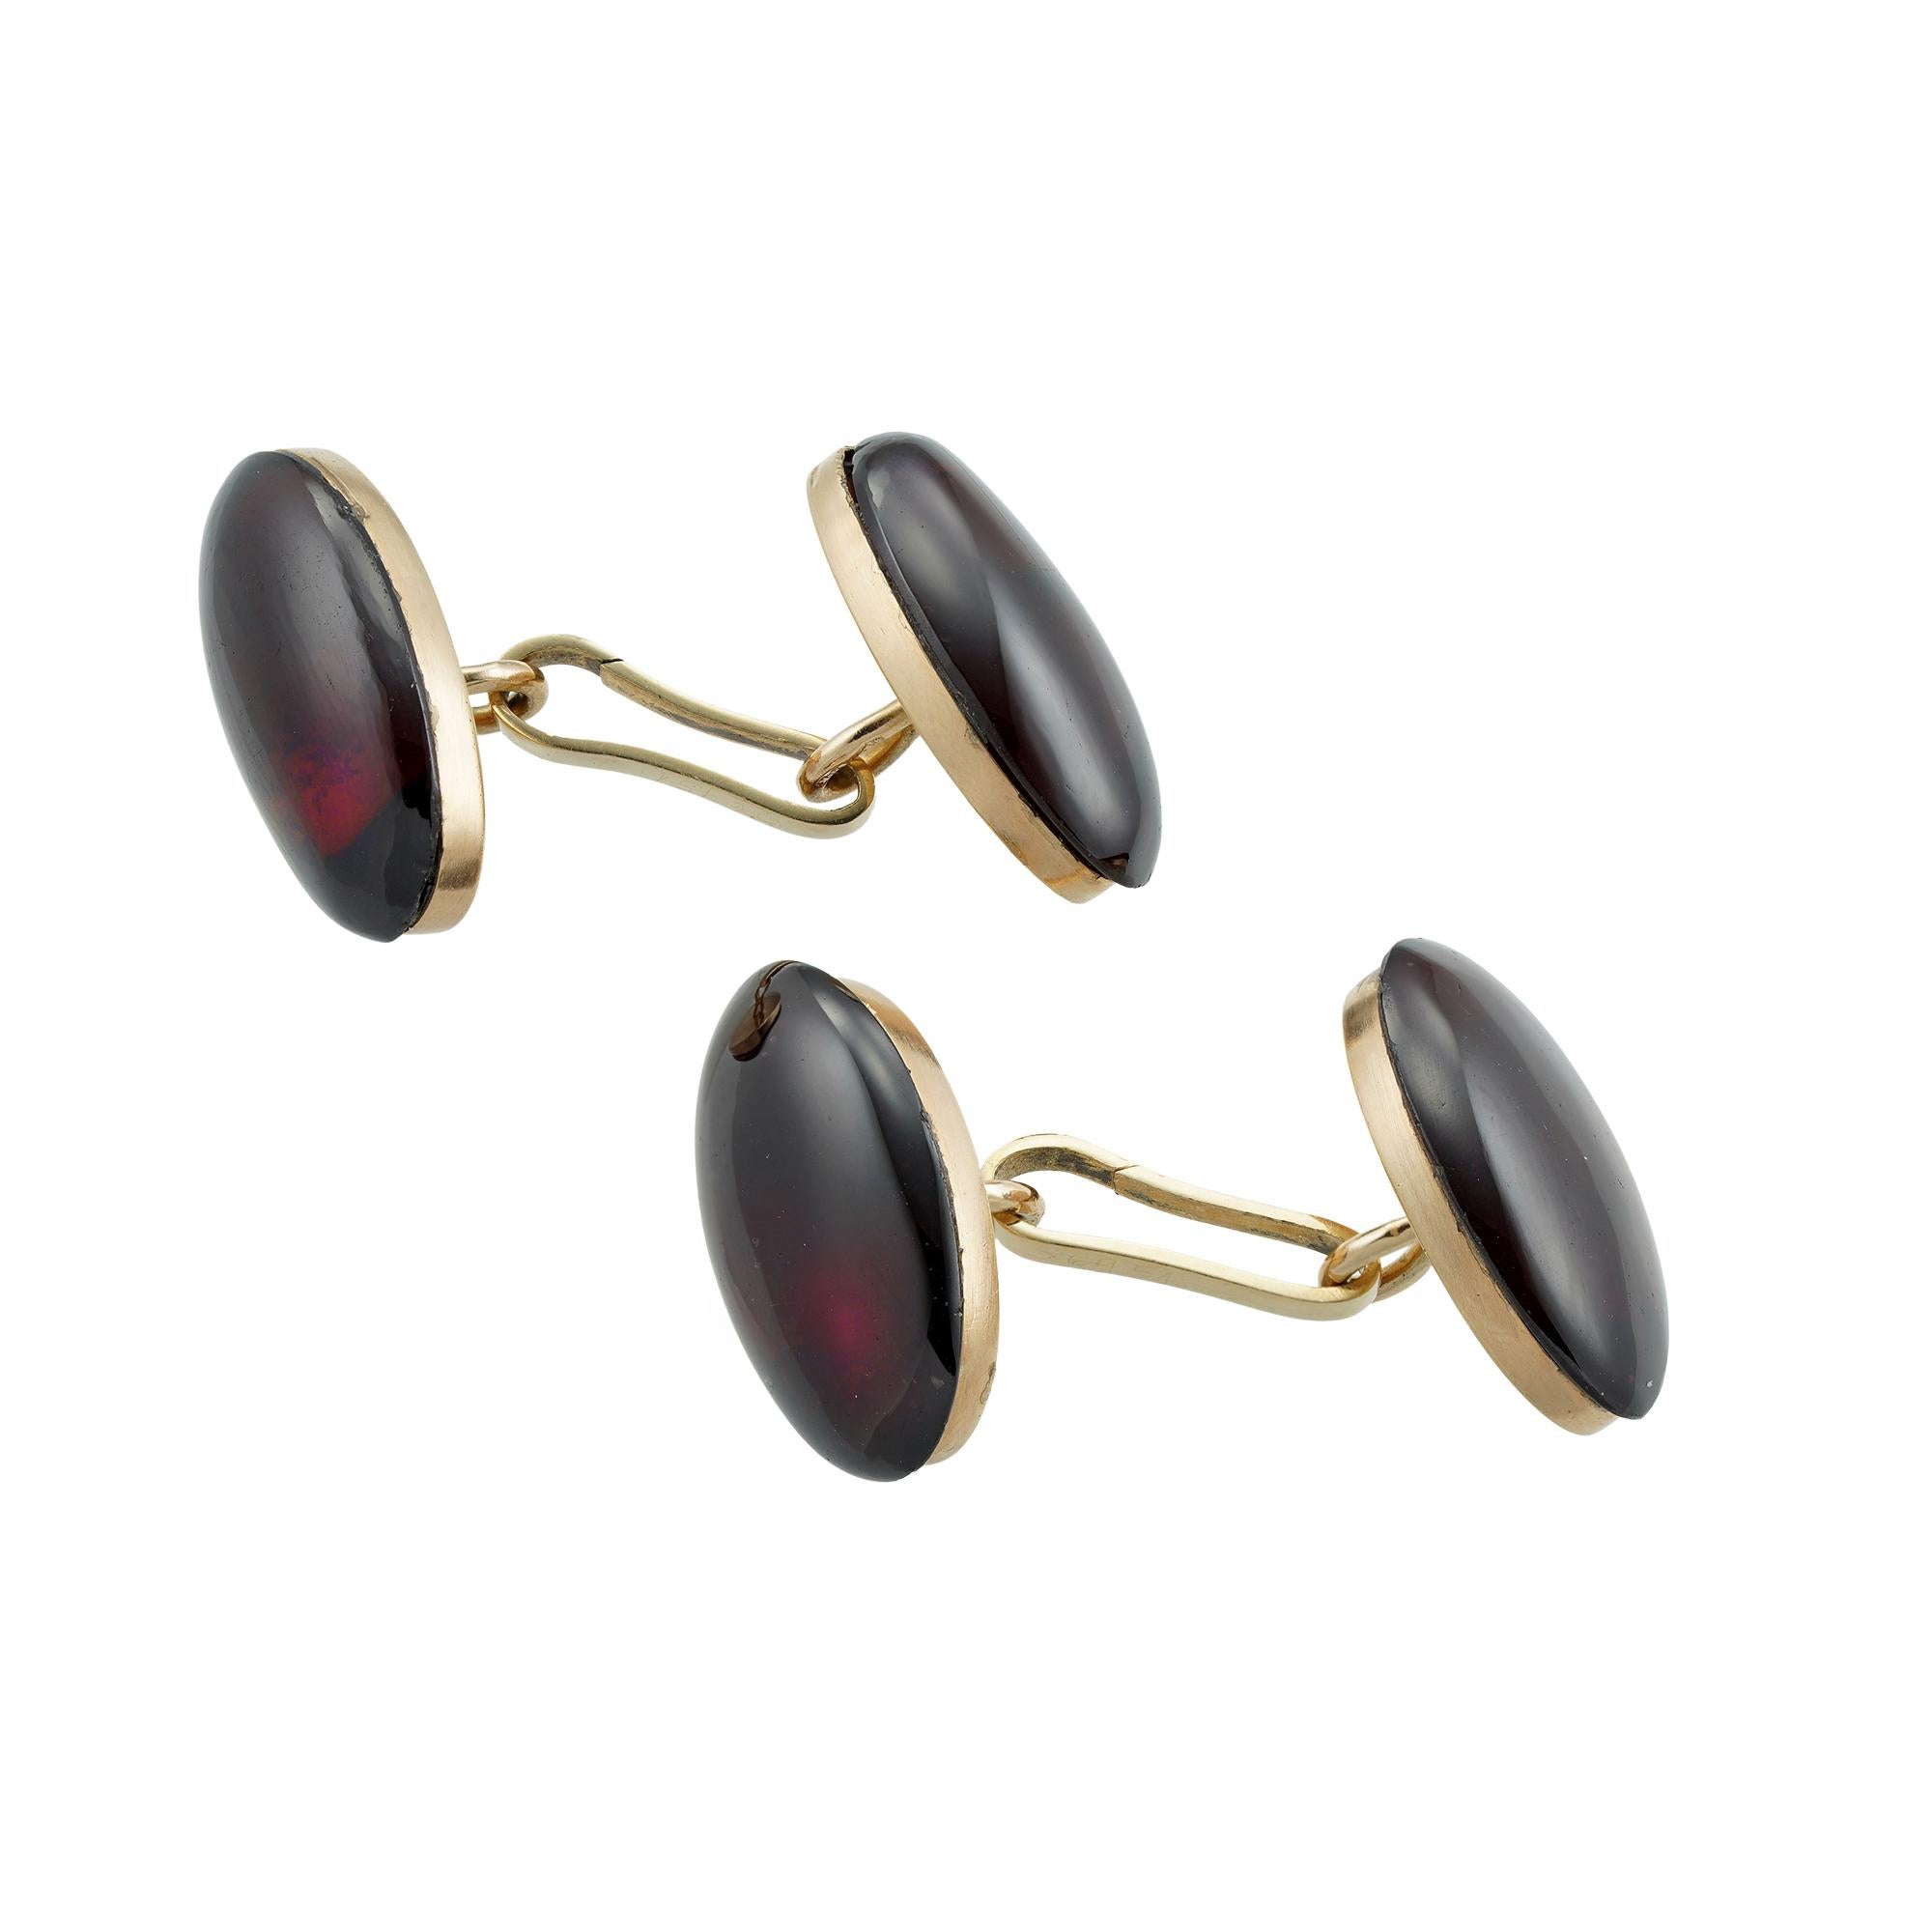 A pair of antique garnet cufflinks, each cufflink with two oval cabochon-cut garnets set in gold back and connected by clip fitting, bearing Austro-Hungarian hallmarks for 14ct gold, circa 1880, measuring approximately 2.2 x 1.2cm, gross weight 18.1